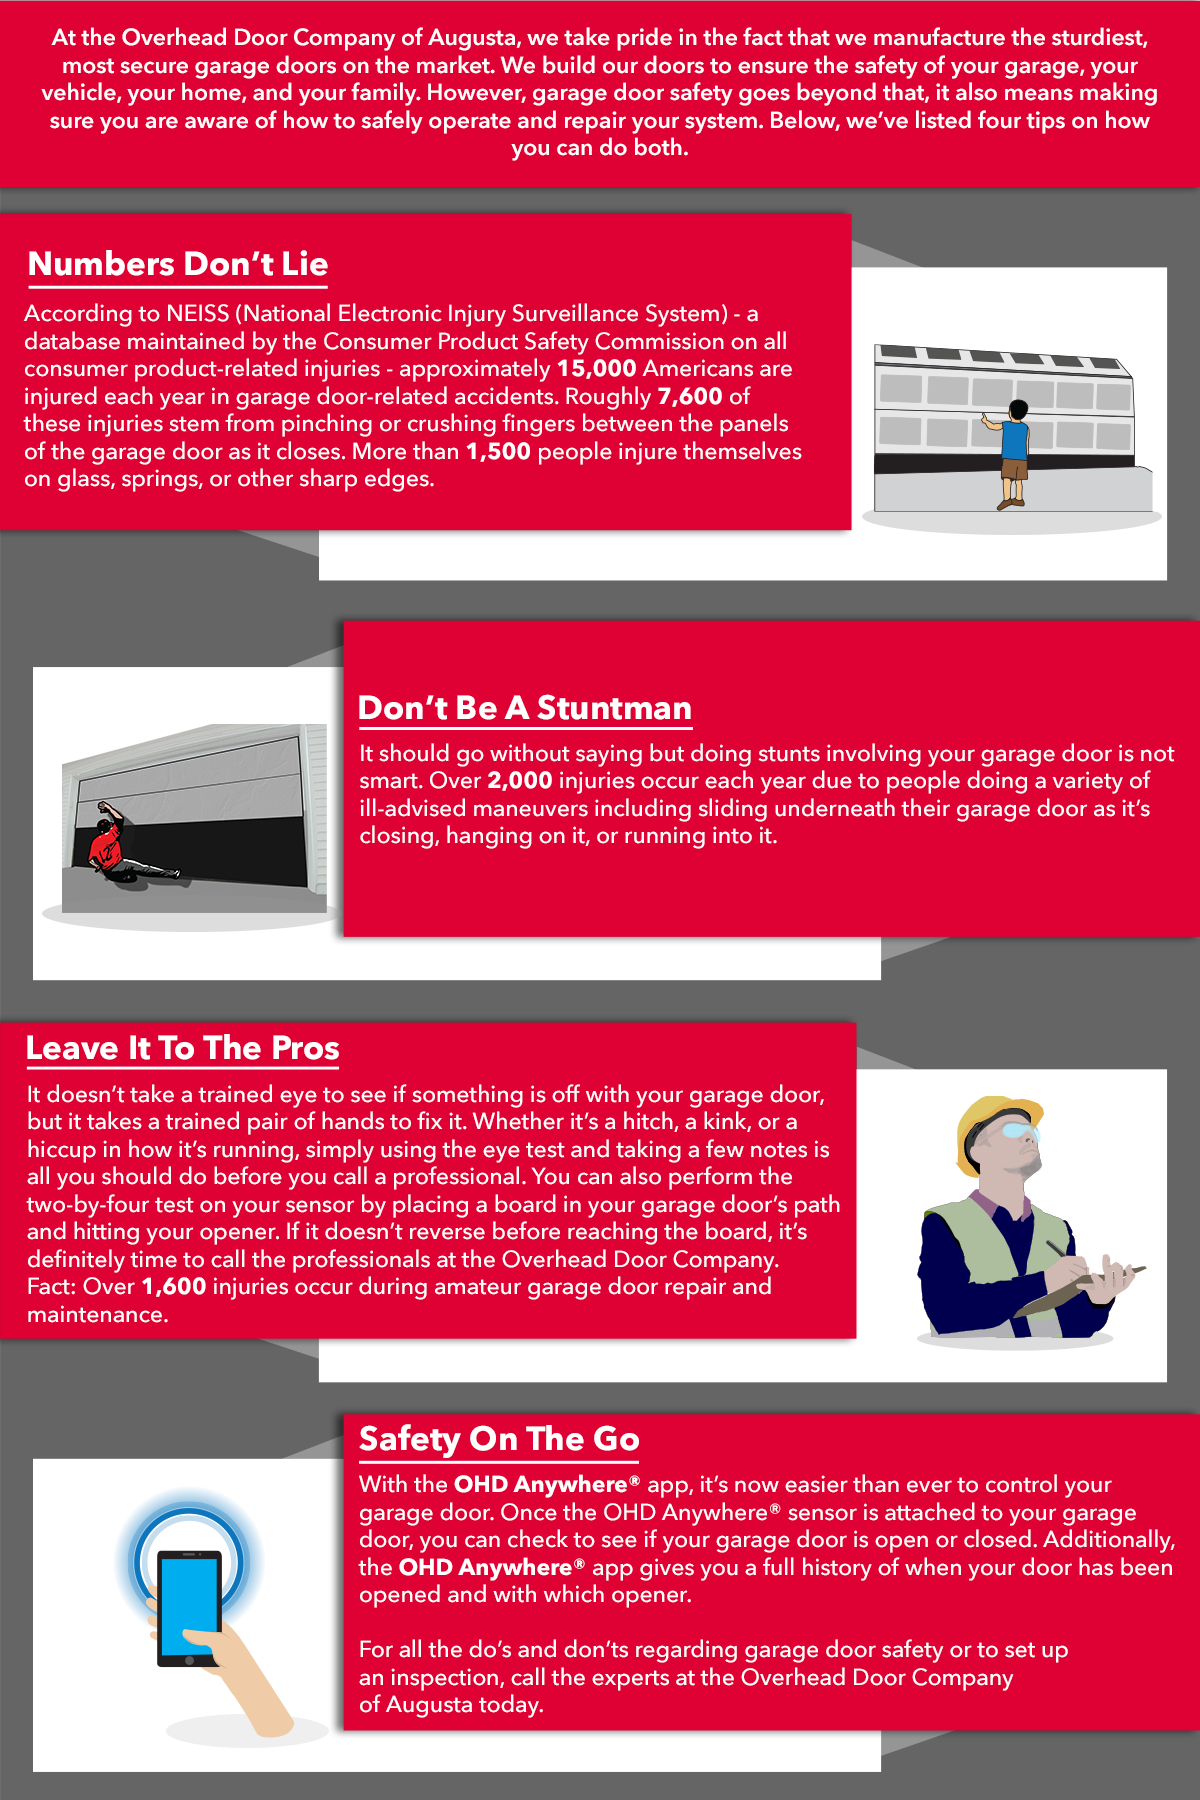 Overhead Company Infographic for Garage Door Safety Month